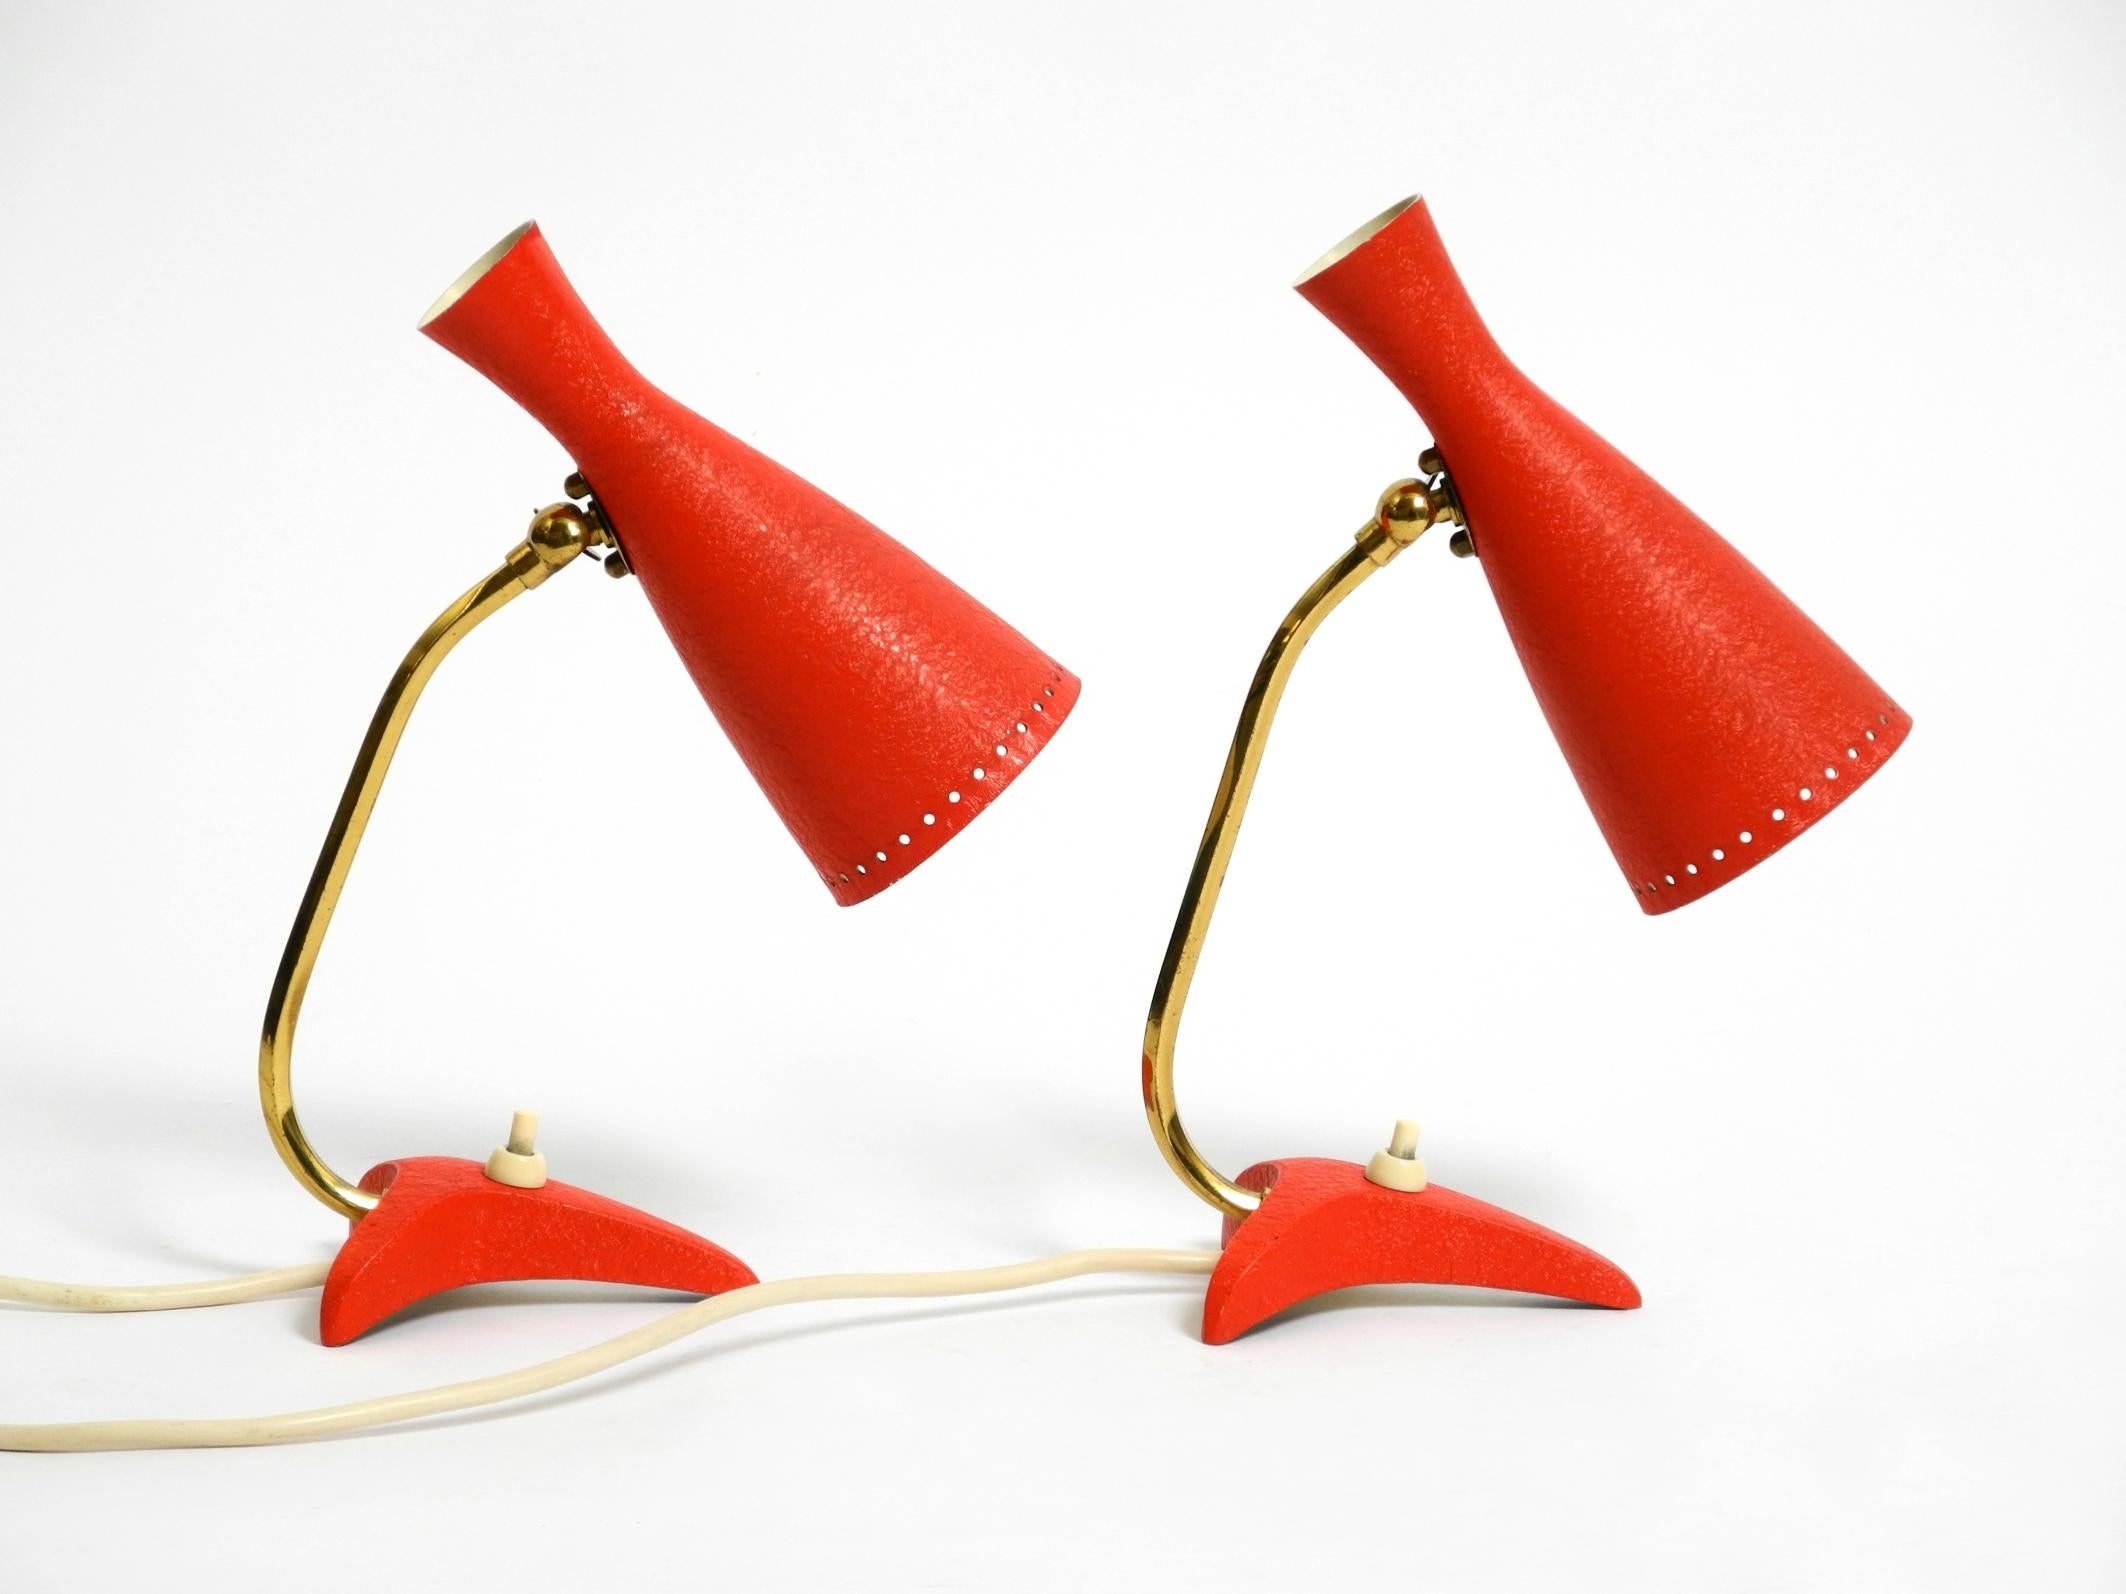 Pair of beautiful red Mid Century Modern Diabolo crowfoot table lamps.
Manufactured by Cosack. Made in Germany.
Very nice design with lots of details. The diabolo lampshade is steplessly adjustable.
Metal base and shade are coated with red shrink